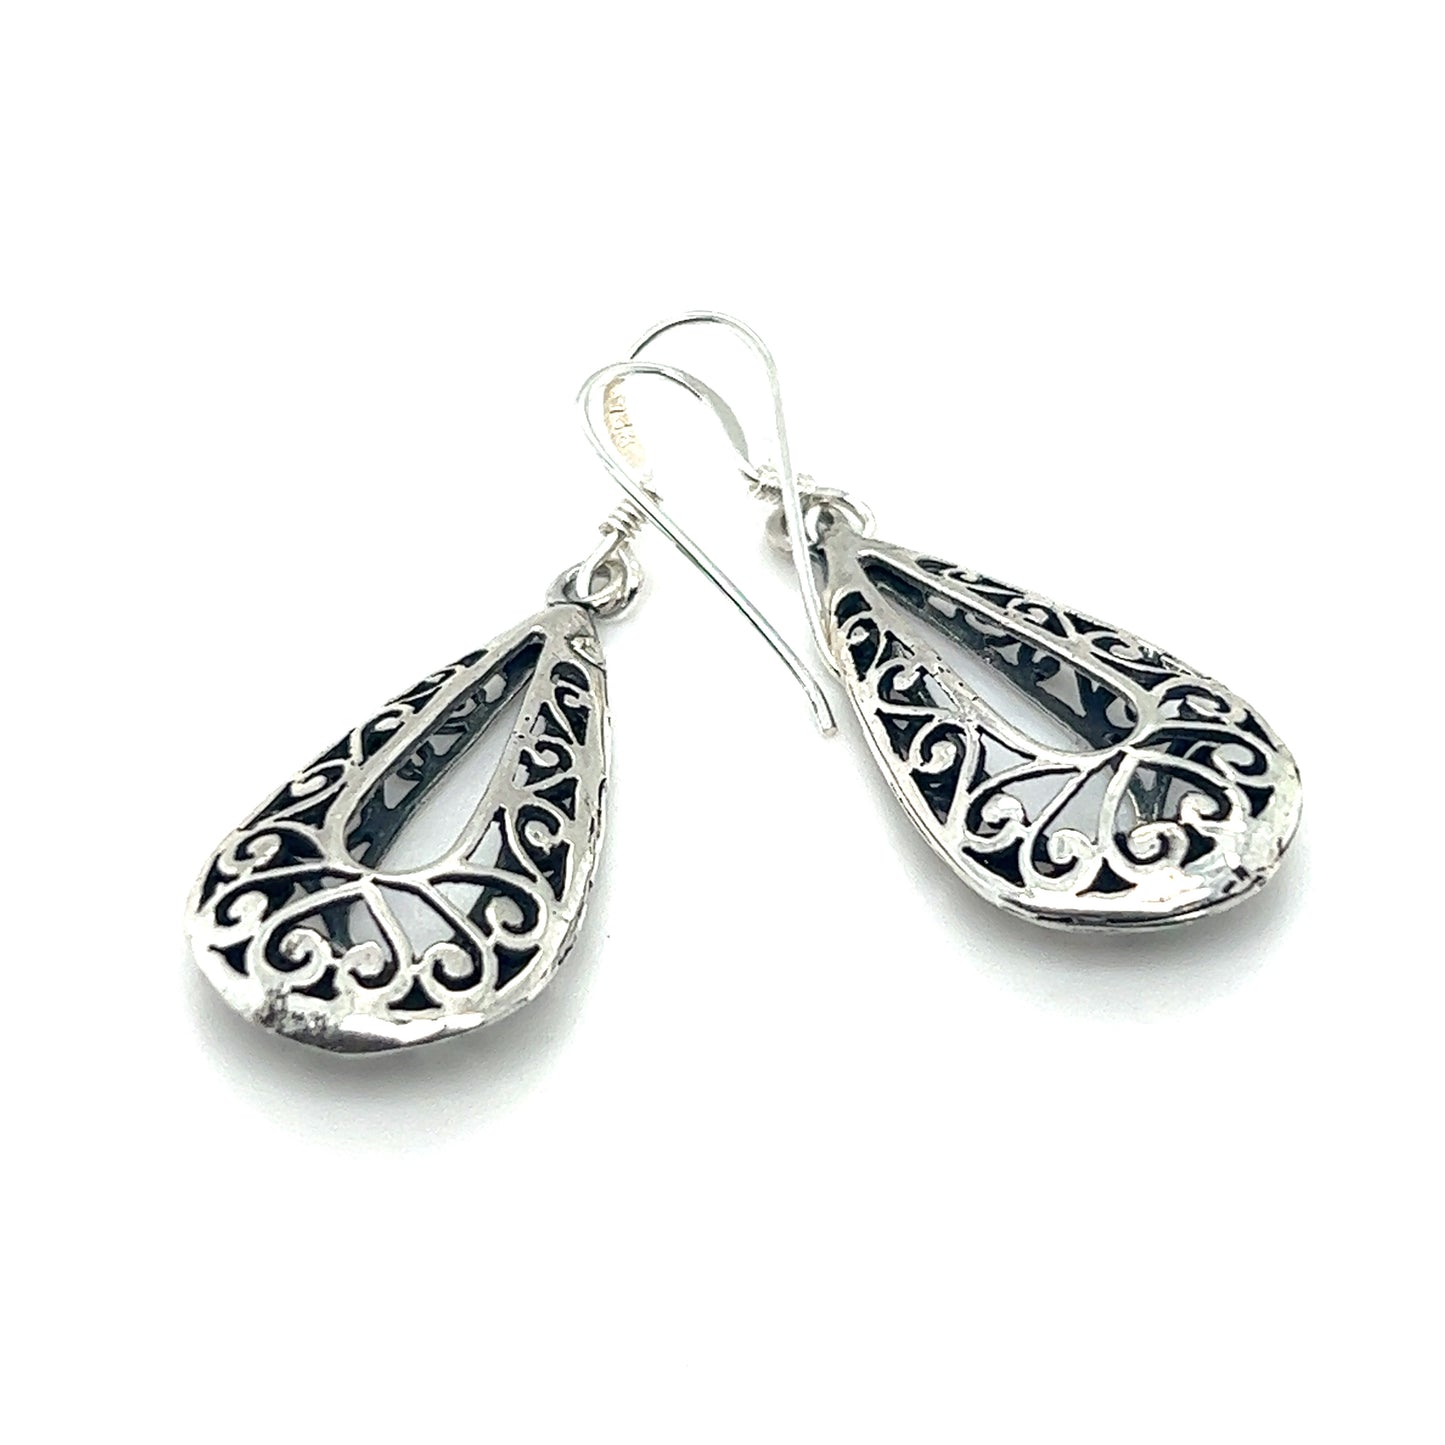 Add bohemian flair to your collection with these stunning Super Silver Filigree Teardrop Earrings with Open Center. Featuring a delicate filigree setting, these earrings are the perfect accessory for any outfit.